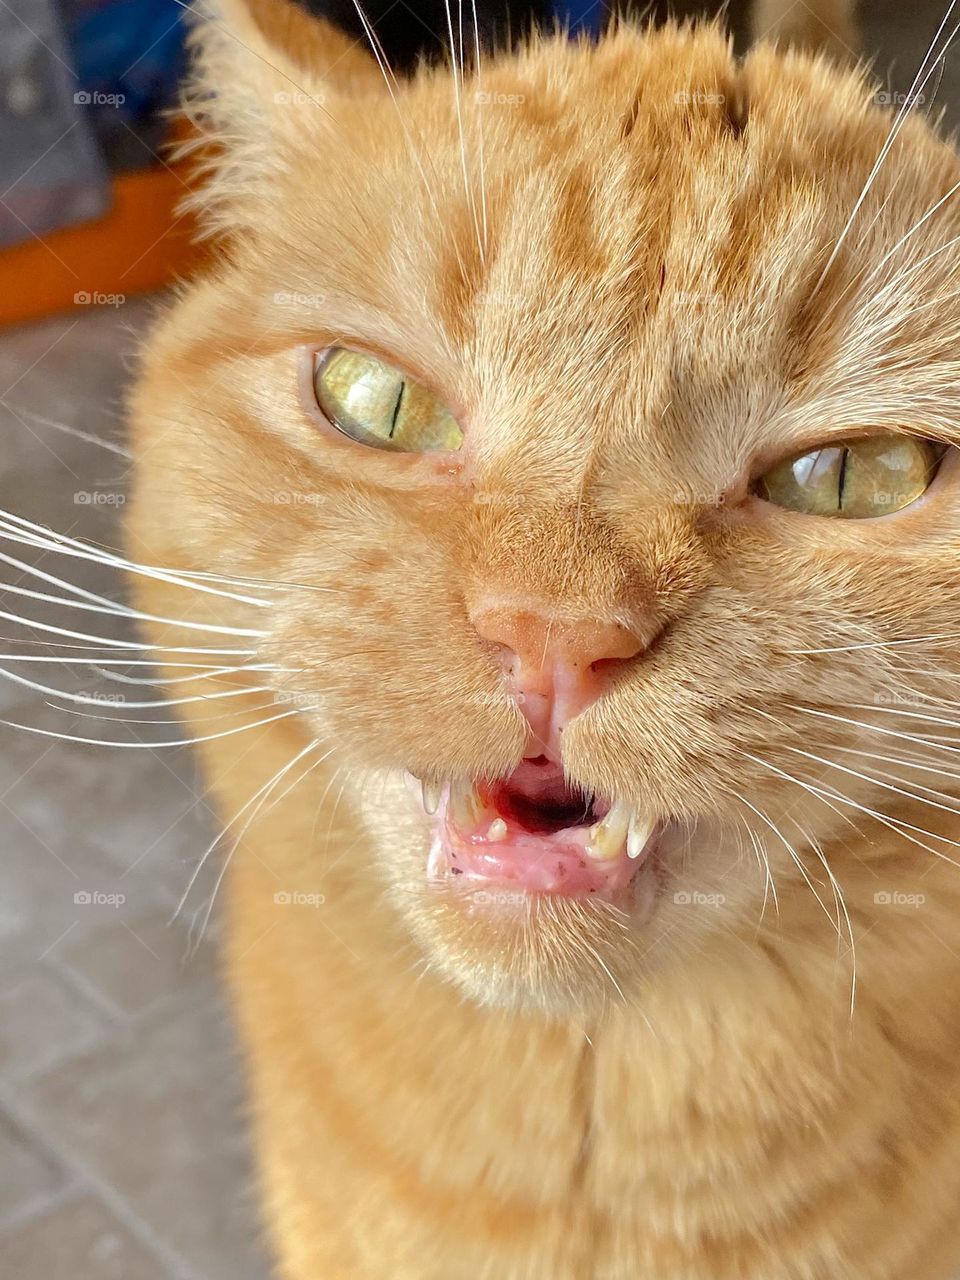 A cat making a funny face after eating a cat treat